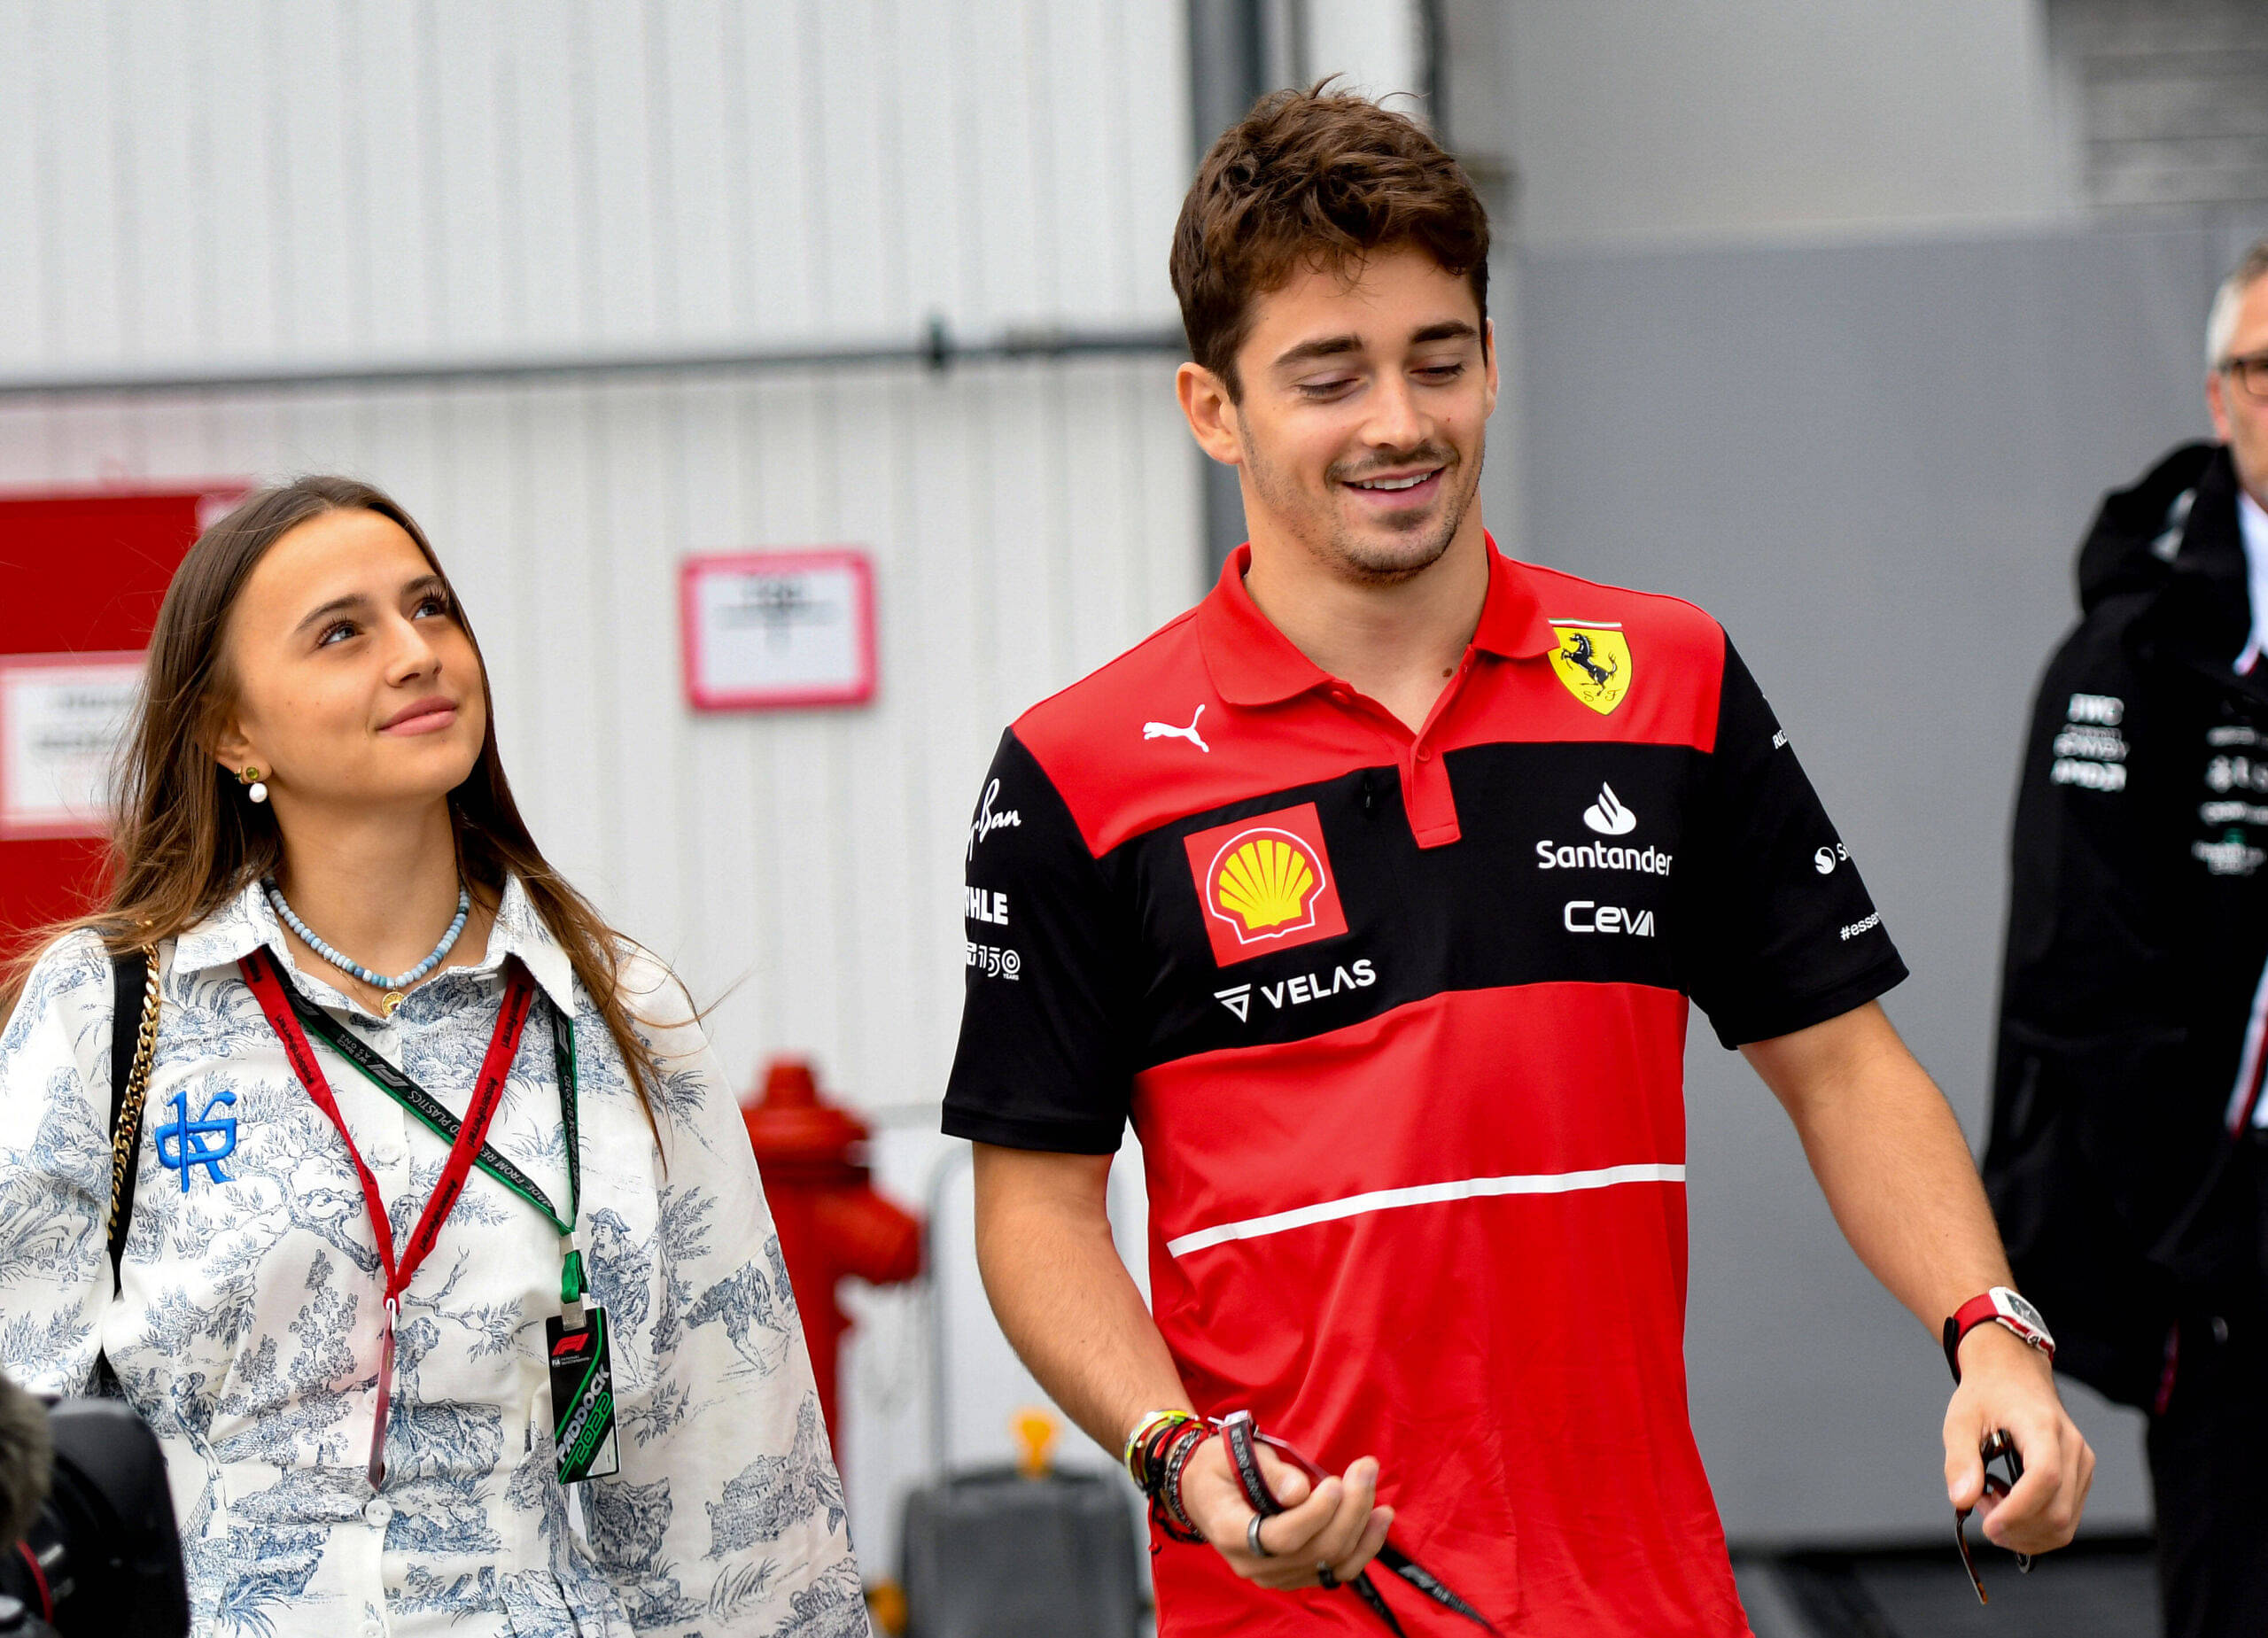 Charles Leclerc's Ex-girlfriend Charlotte Sine Prompts Fans to Wonder If She is Visiting the Ferrari Star